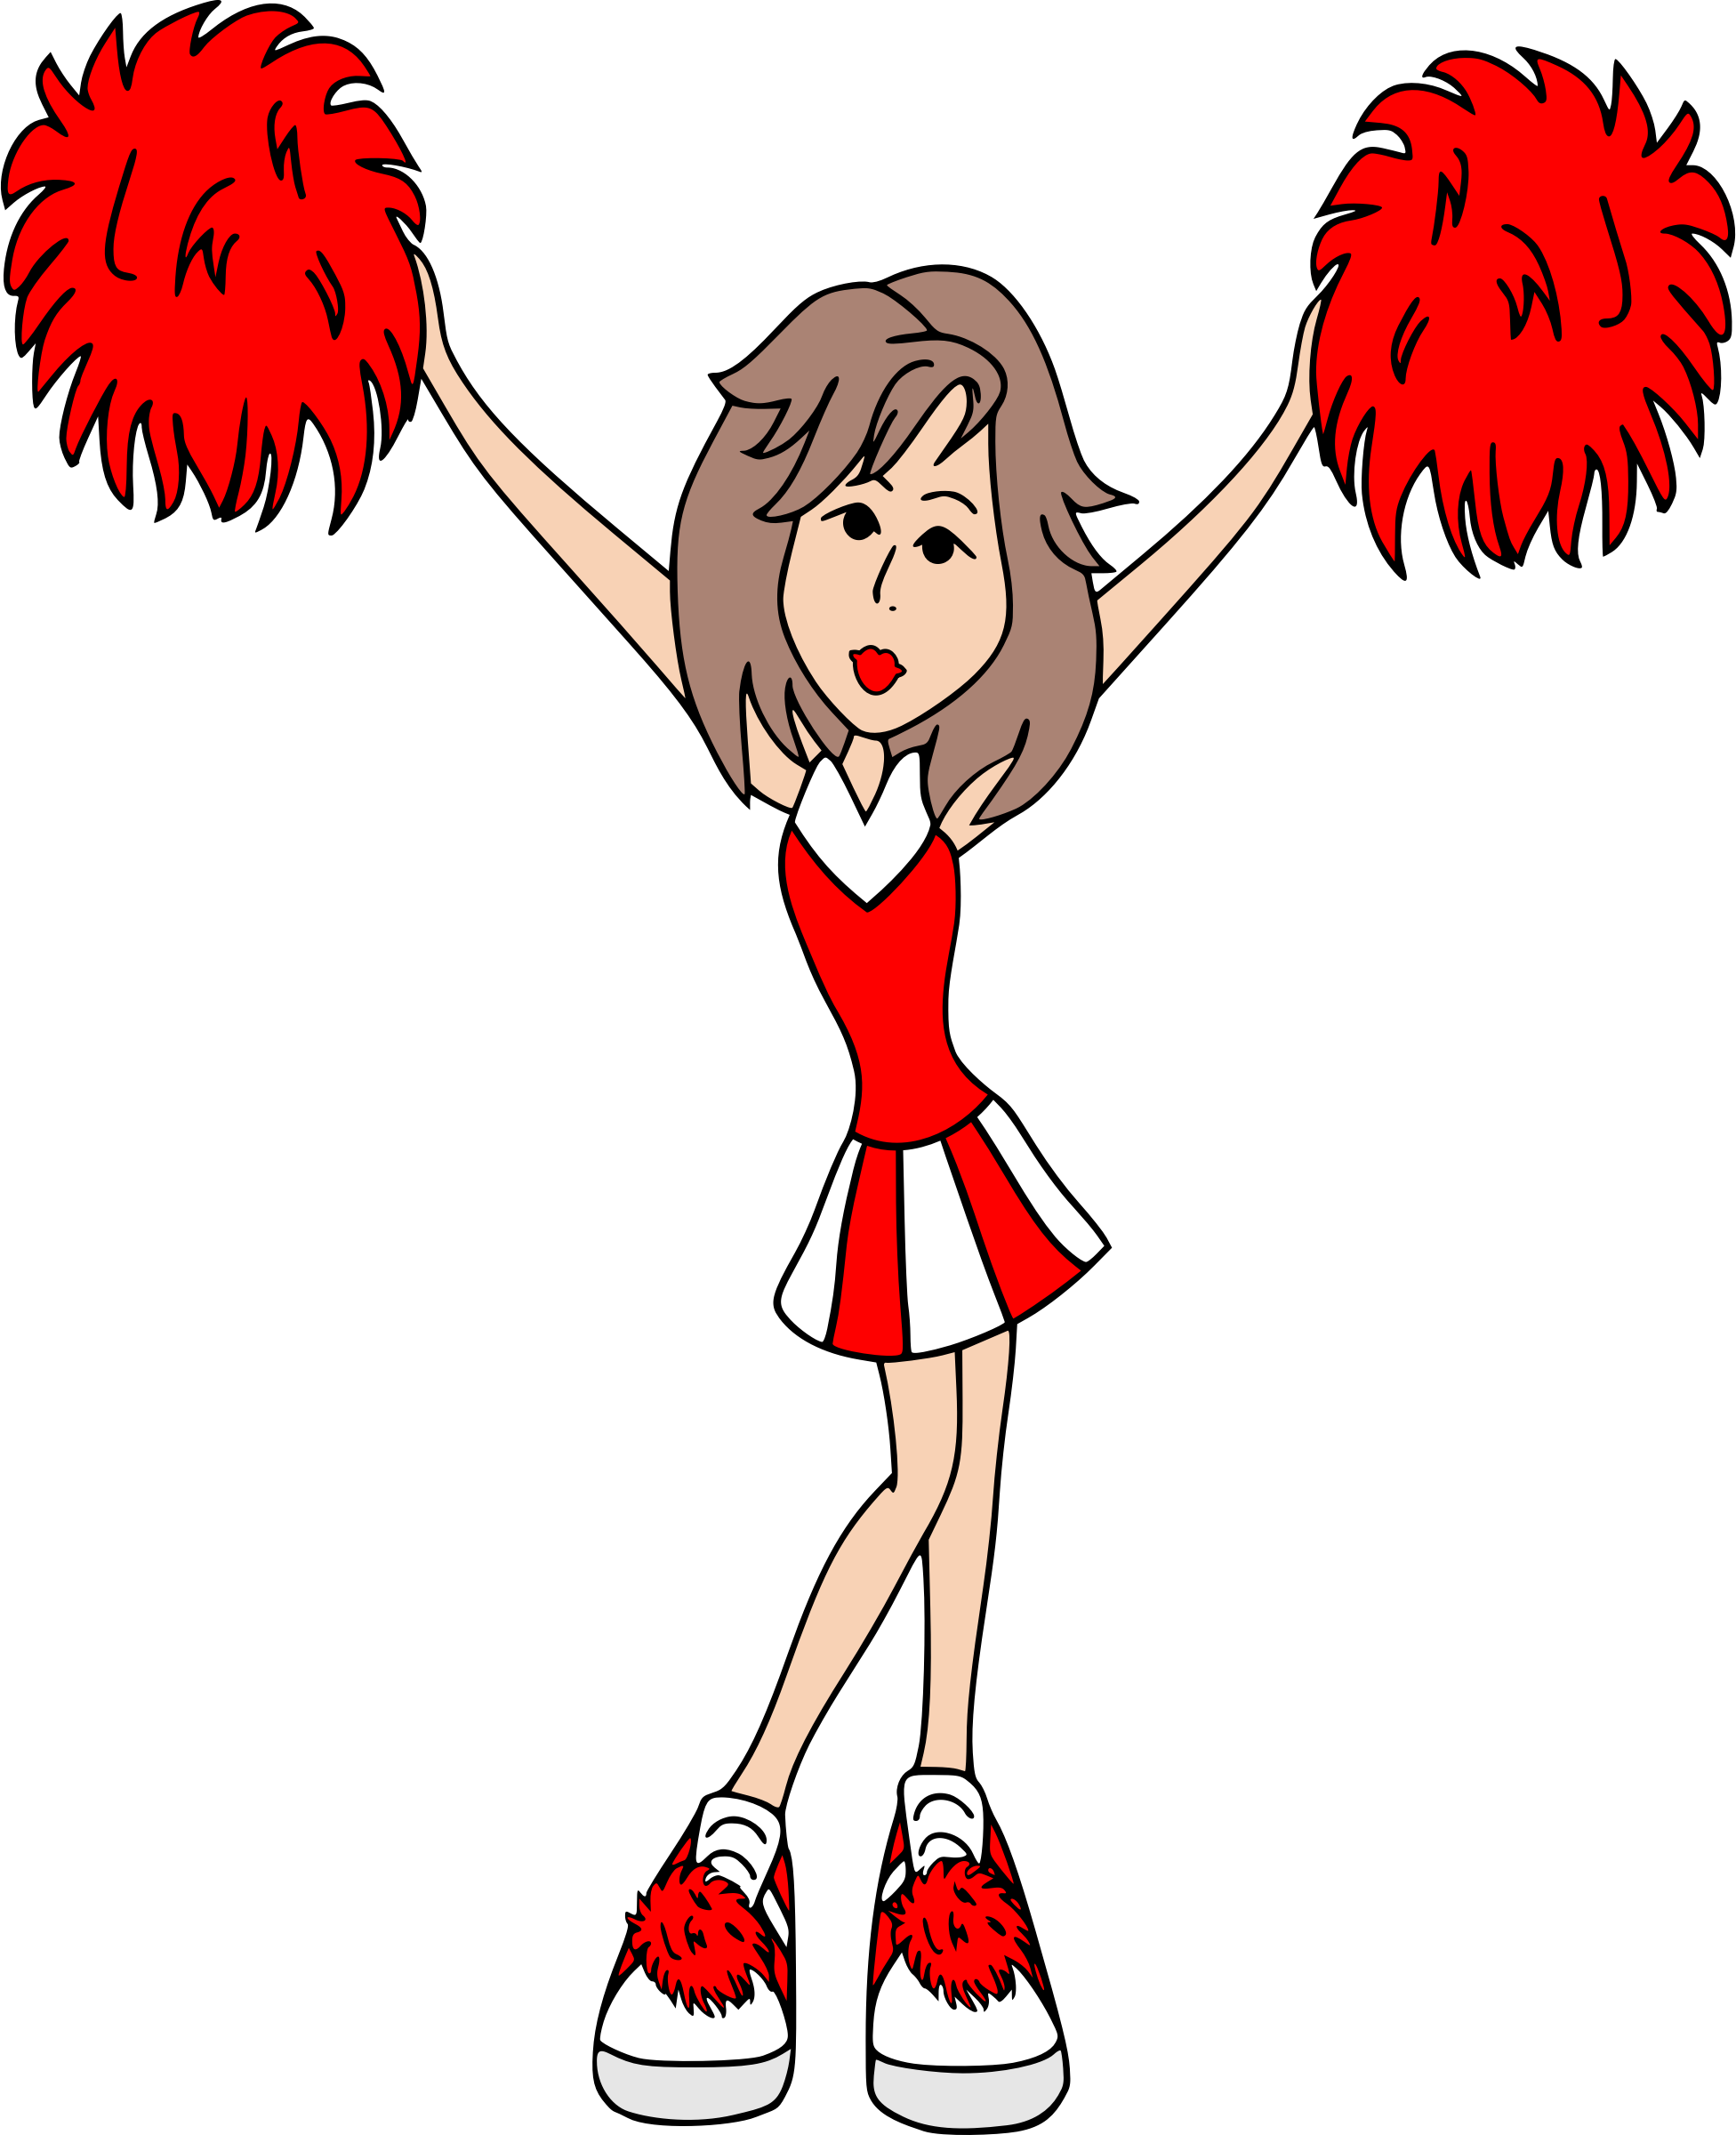 Red clipart cheerleader Red cheerleader Transparent FREE for download on WebStockReview 2020